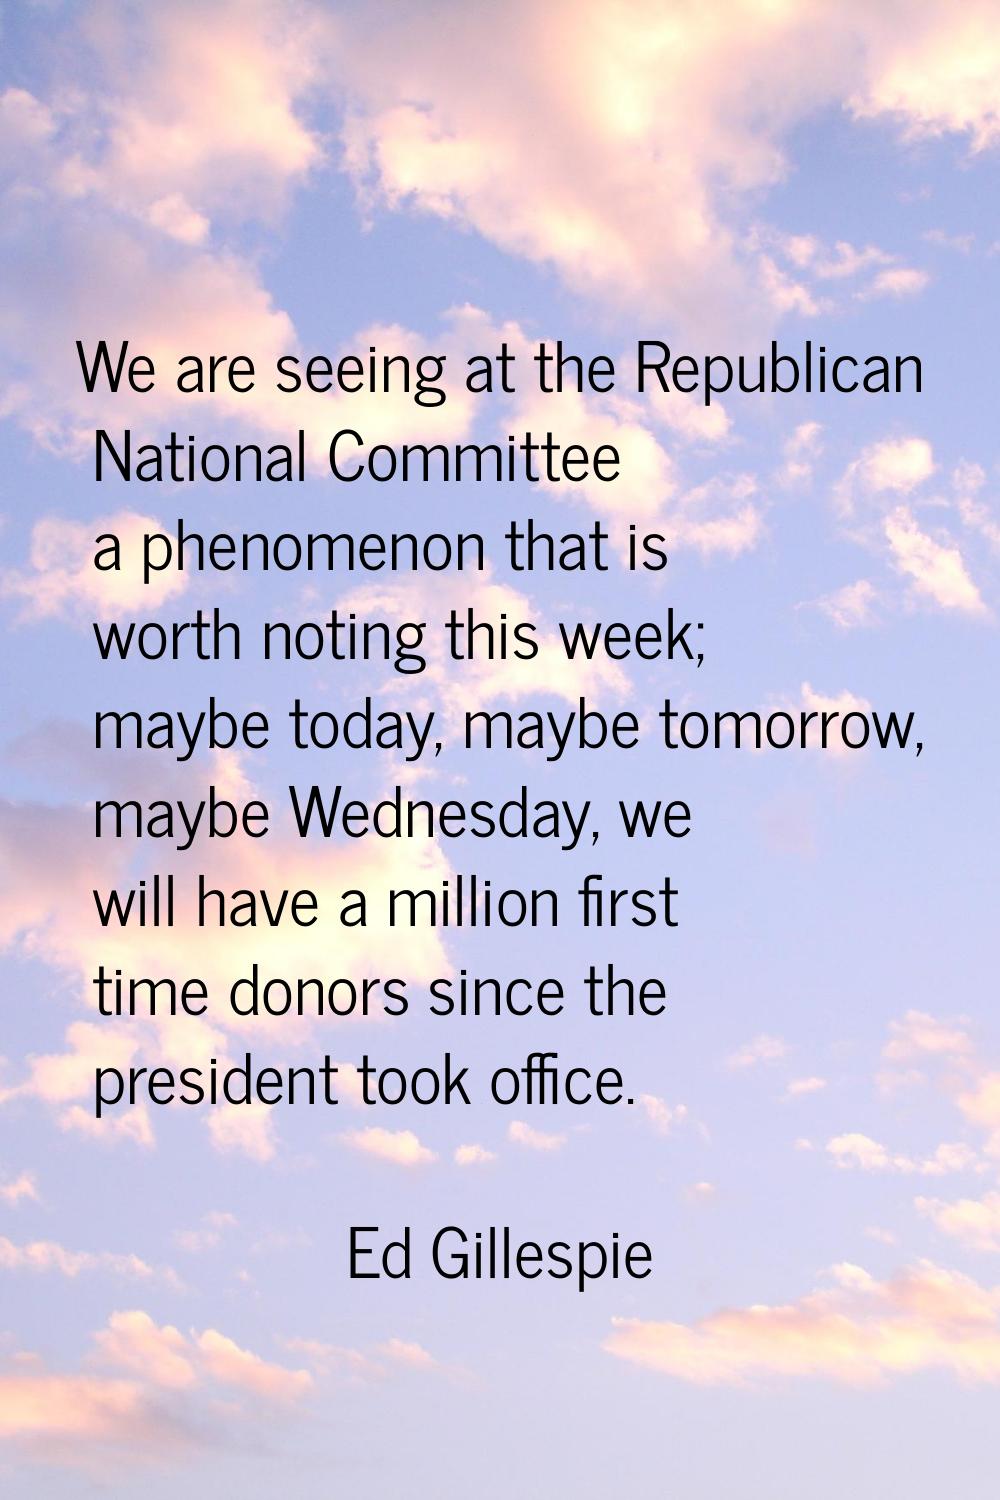 We are seeing at the Republican National Committee a phenomenon that is worth noting this week; may